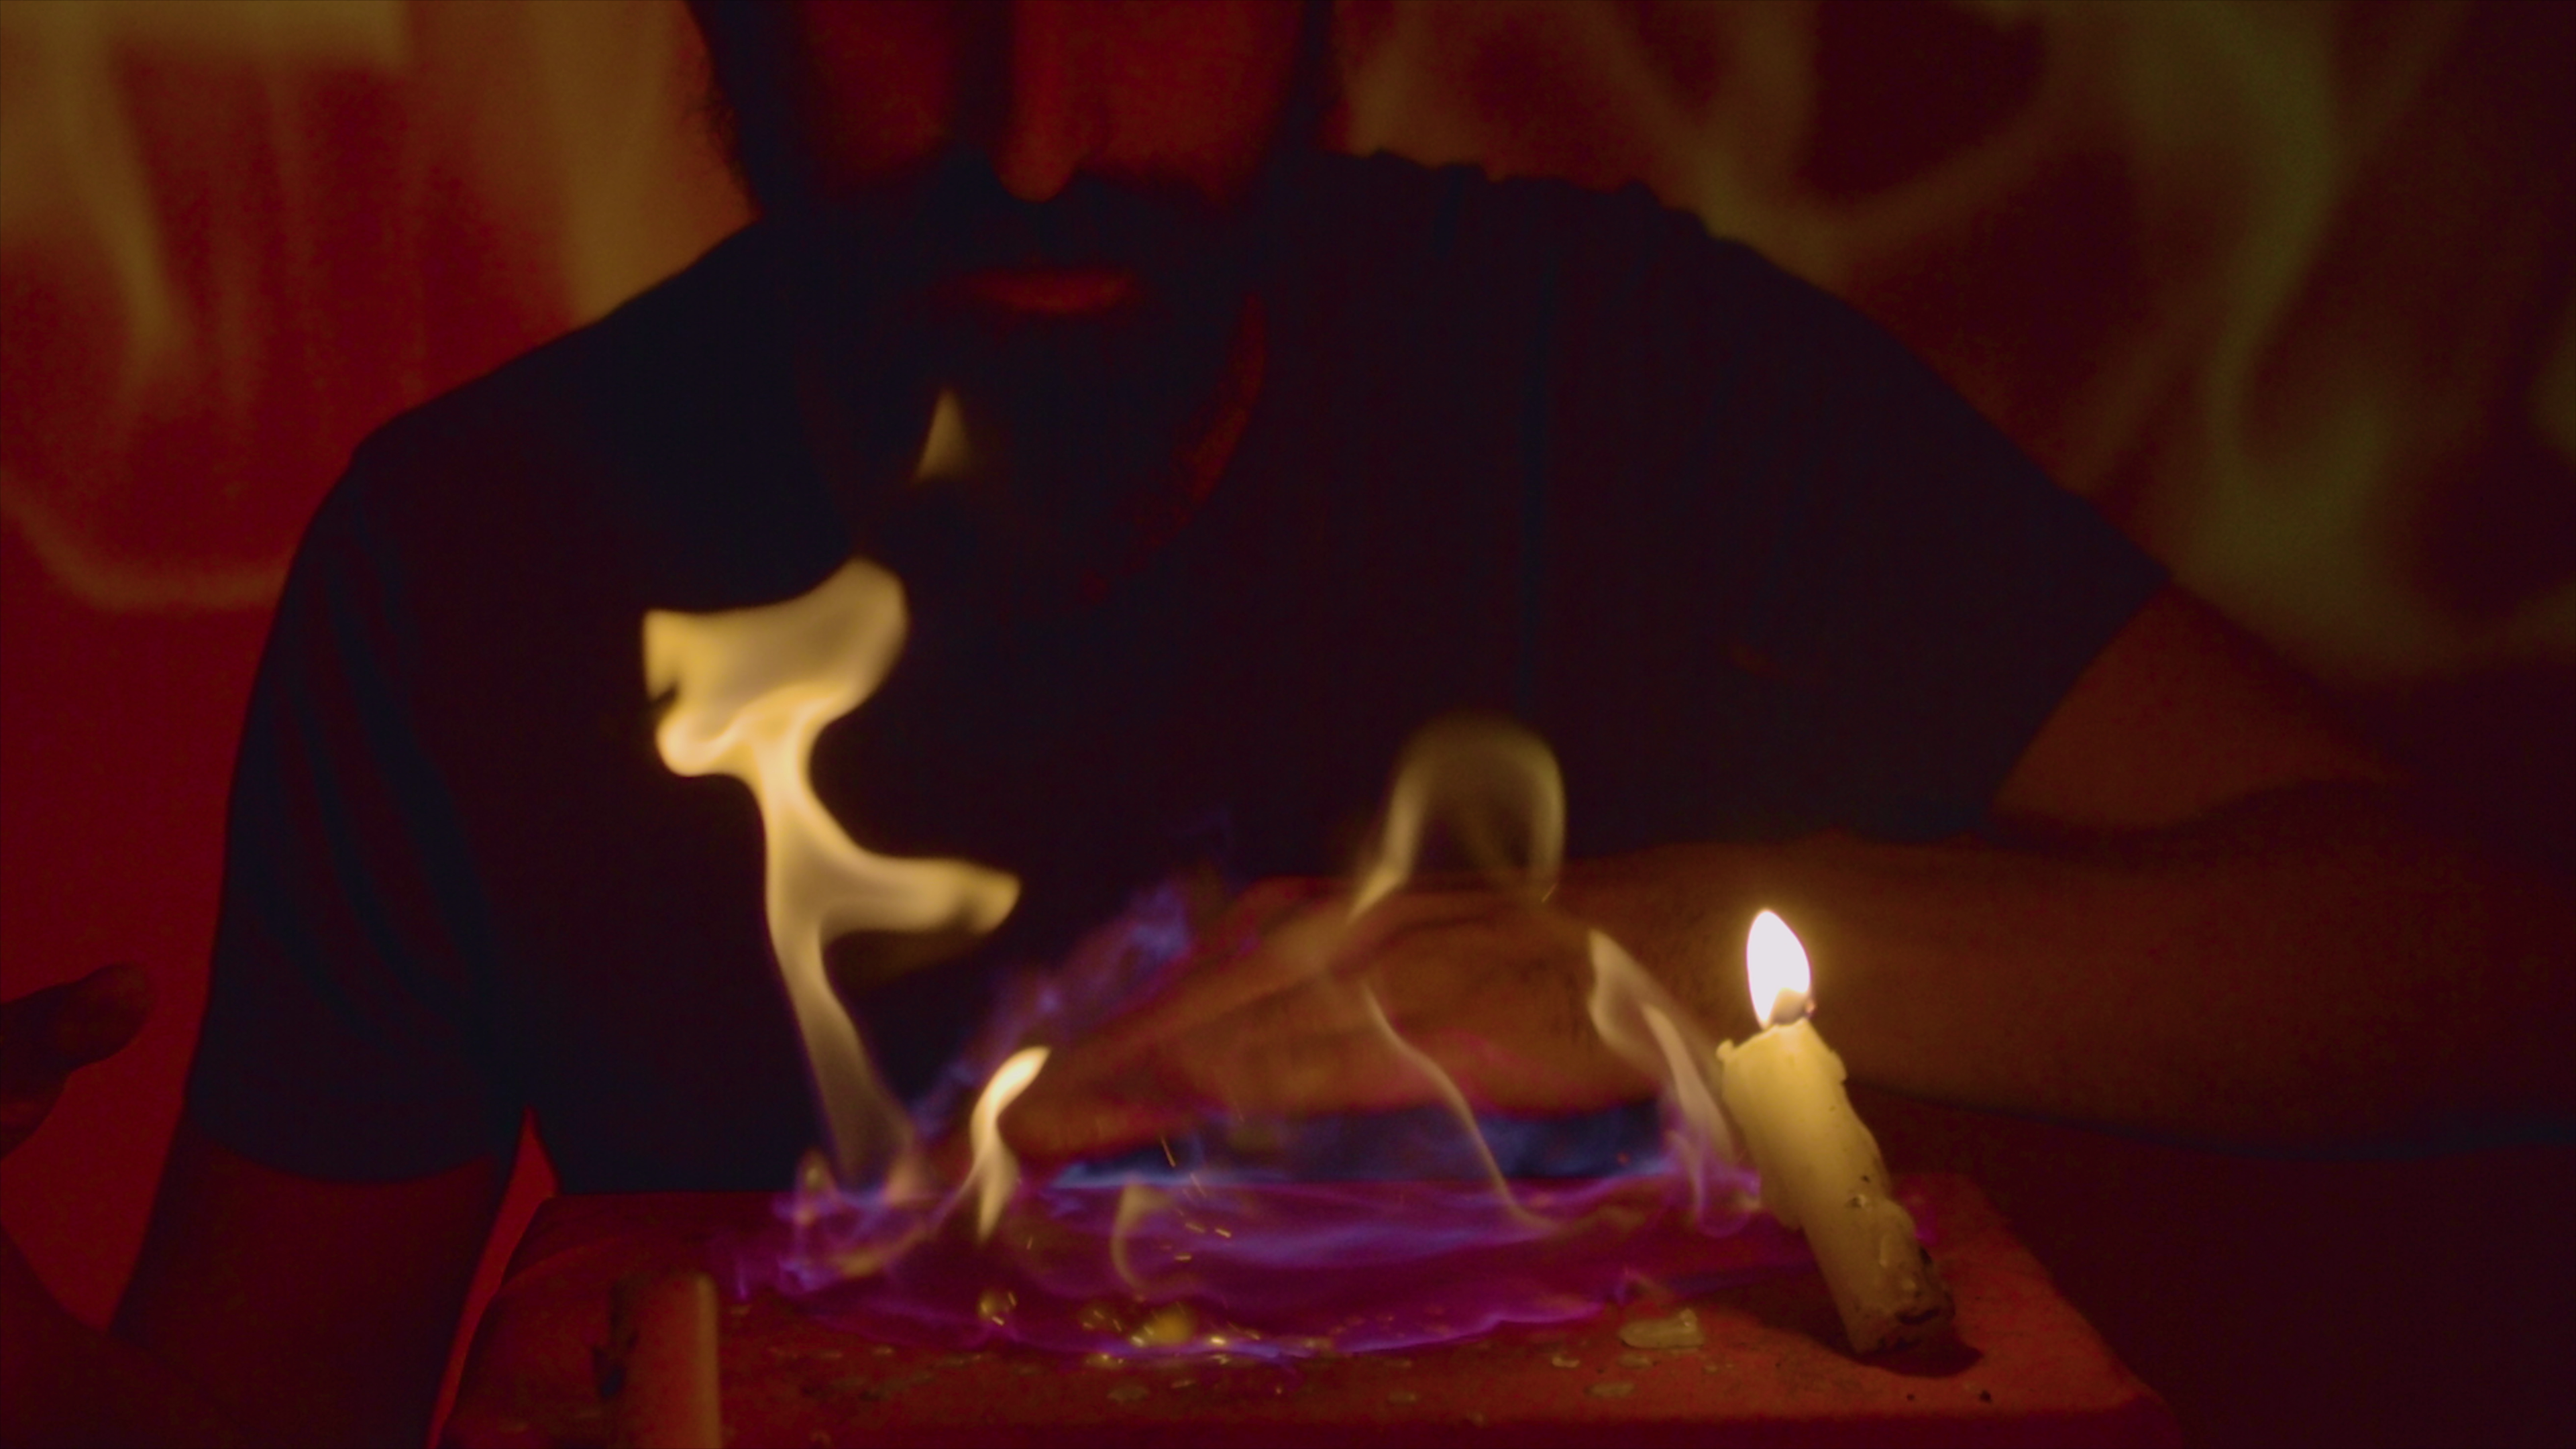 Still from "Pyromania" directed by Michael J. Epstein. Cinematography by Sophia Cacciola.